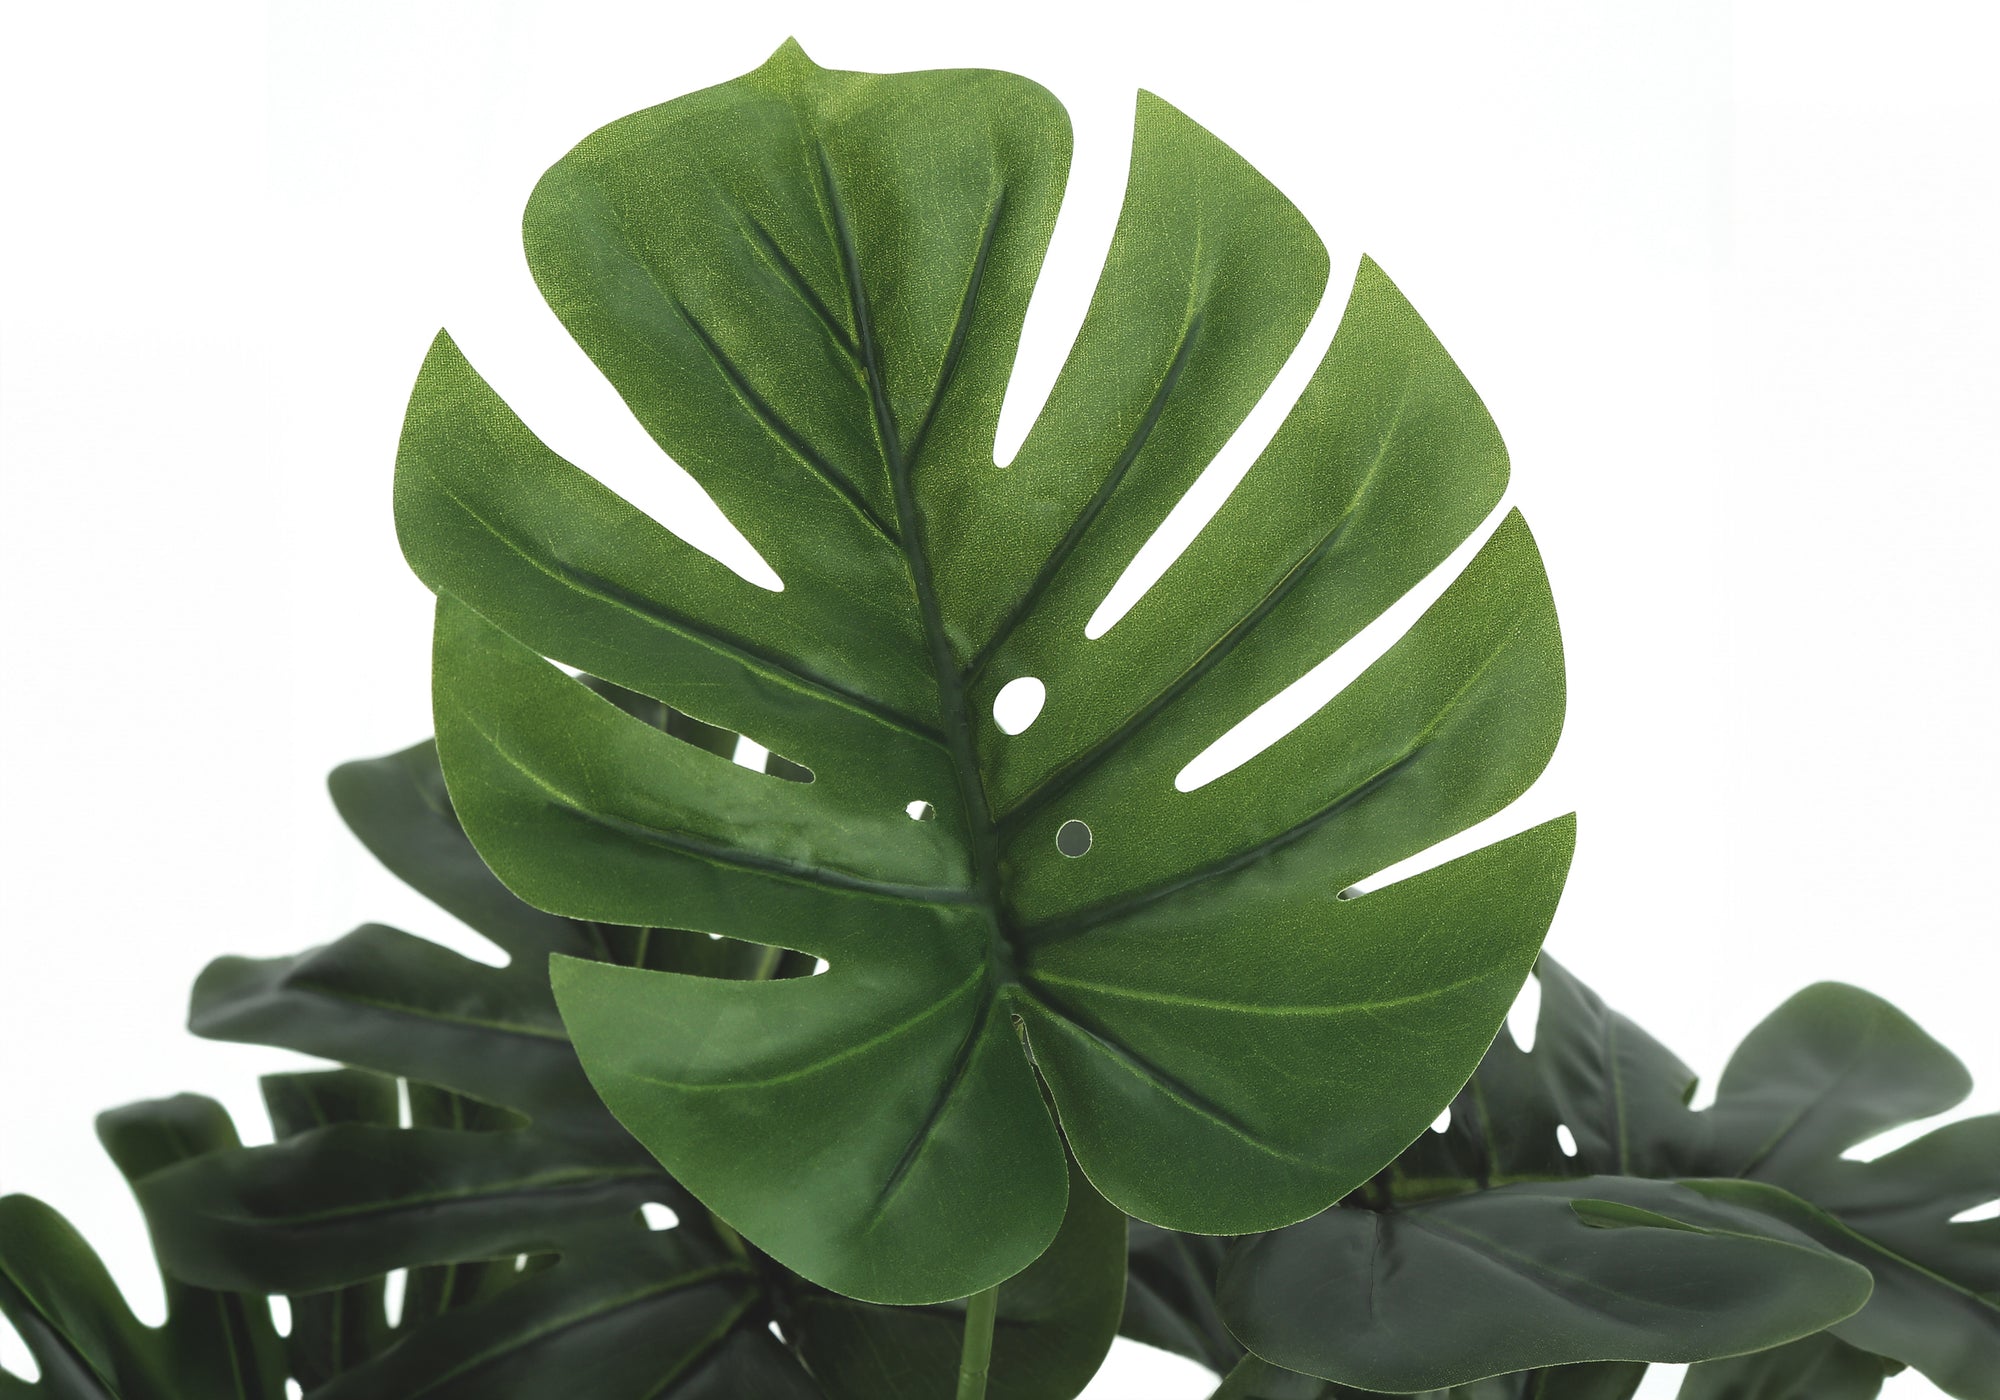 ARTIFICIAL PLANT - 24"H / INDOOR MONSTERA IN A 5" POT